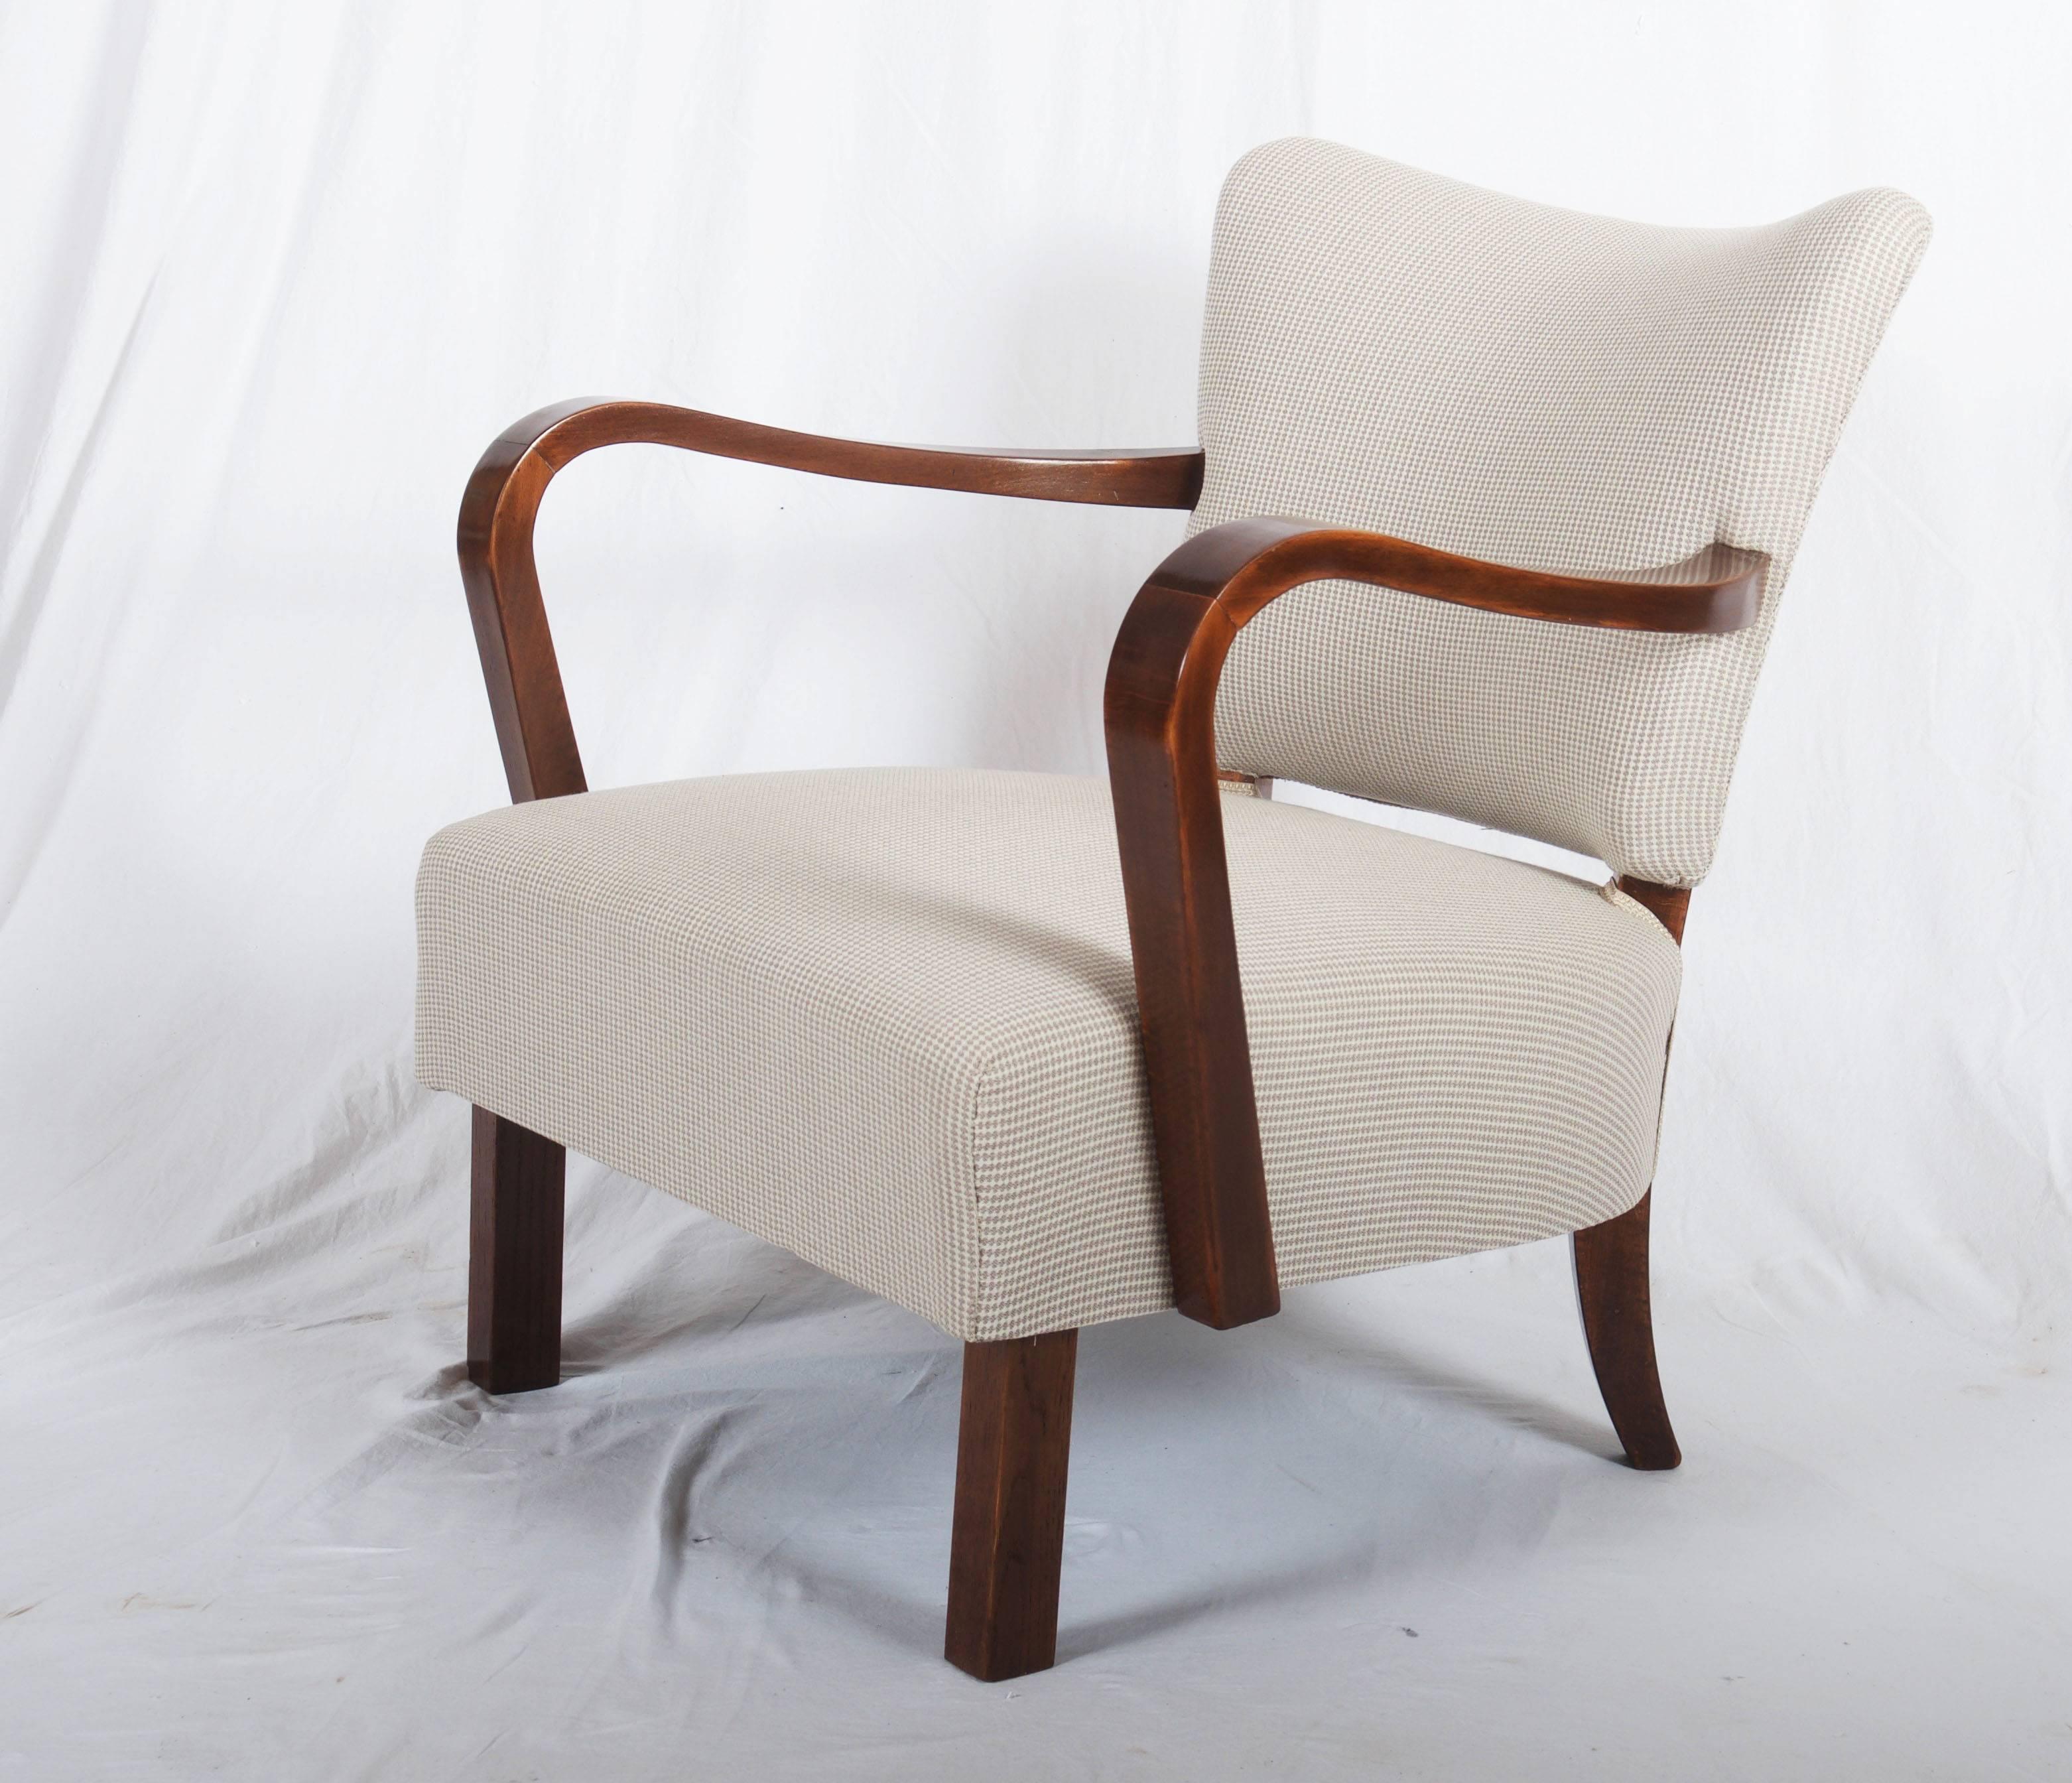 Armchairs designed in the late 1930s by Jindrich Halabala for Thonet, fully restored.
Delivery time 5-6 weeks.
 